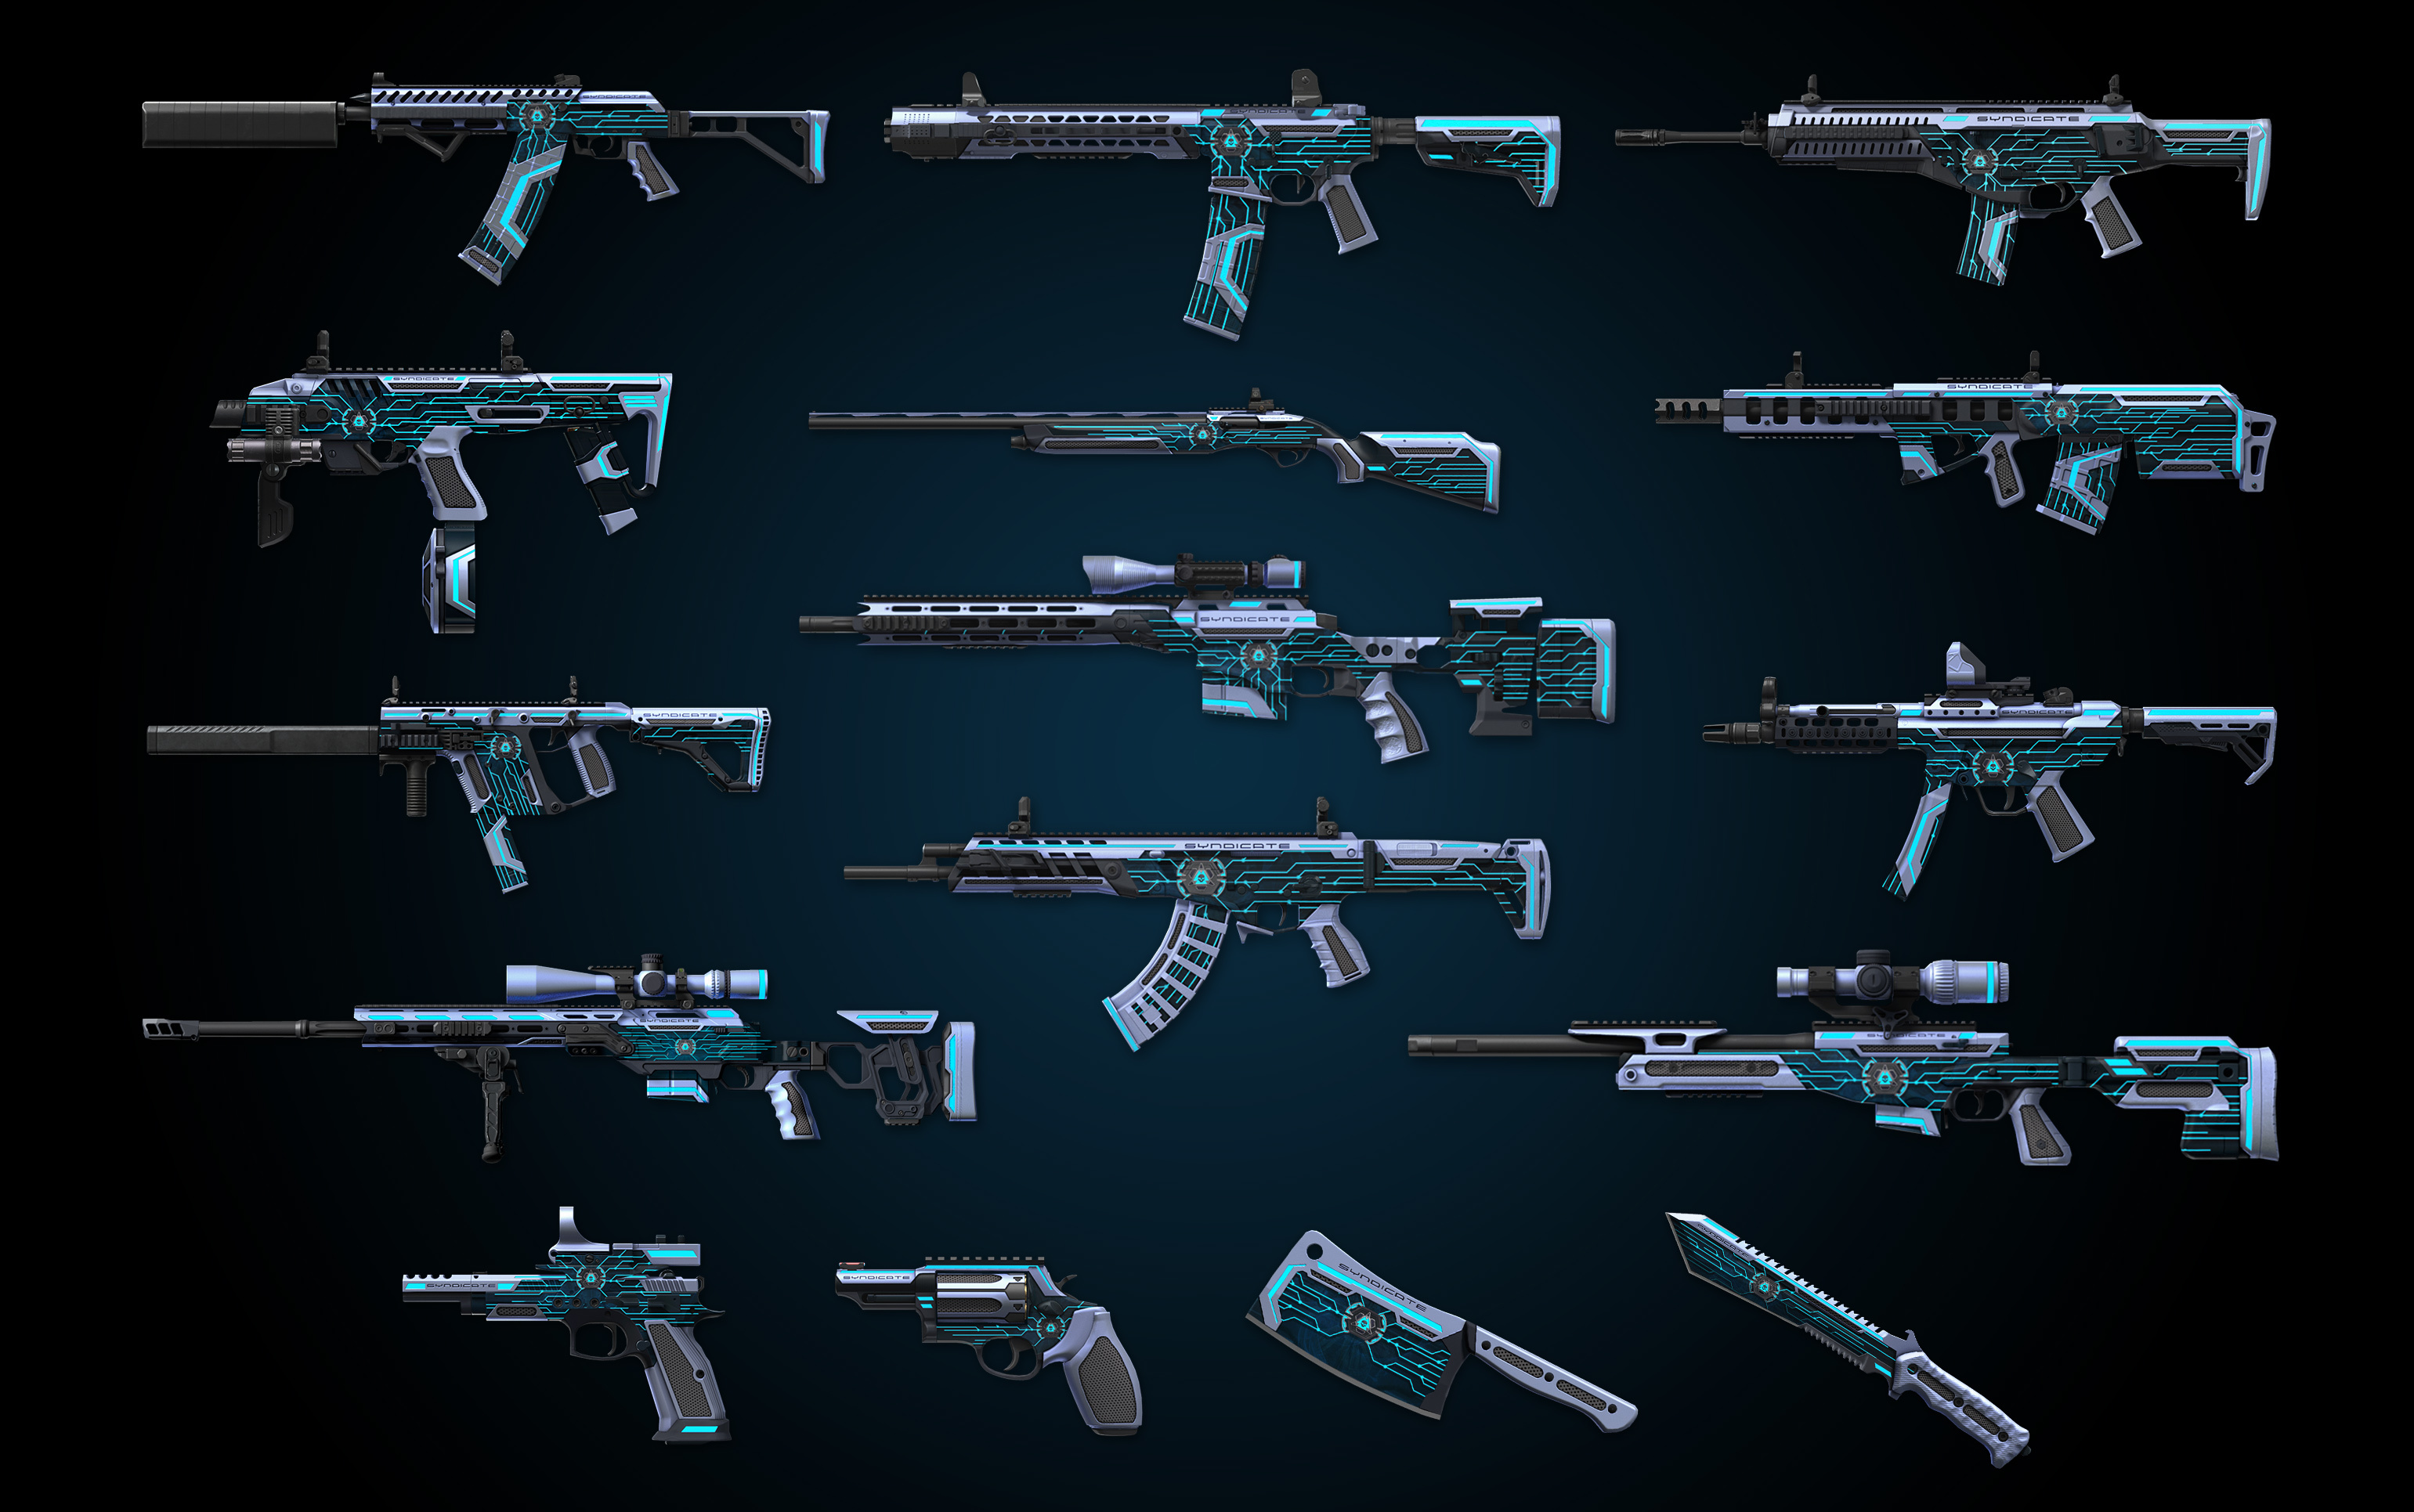 RE5 Assault rifles style and skin pack